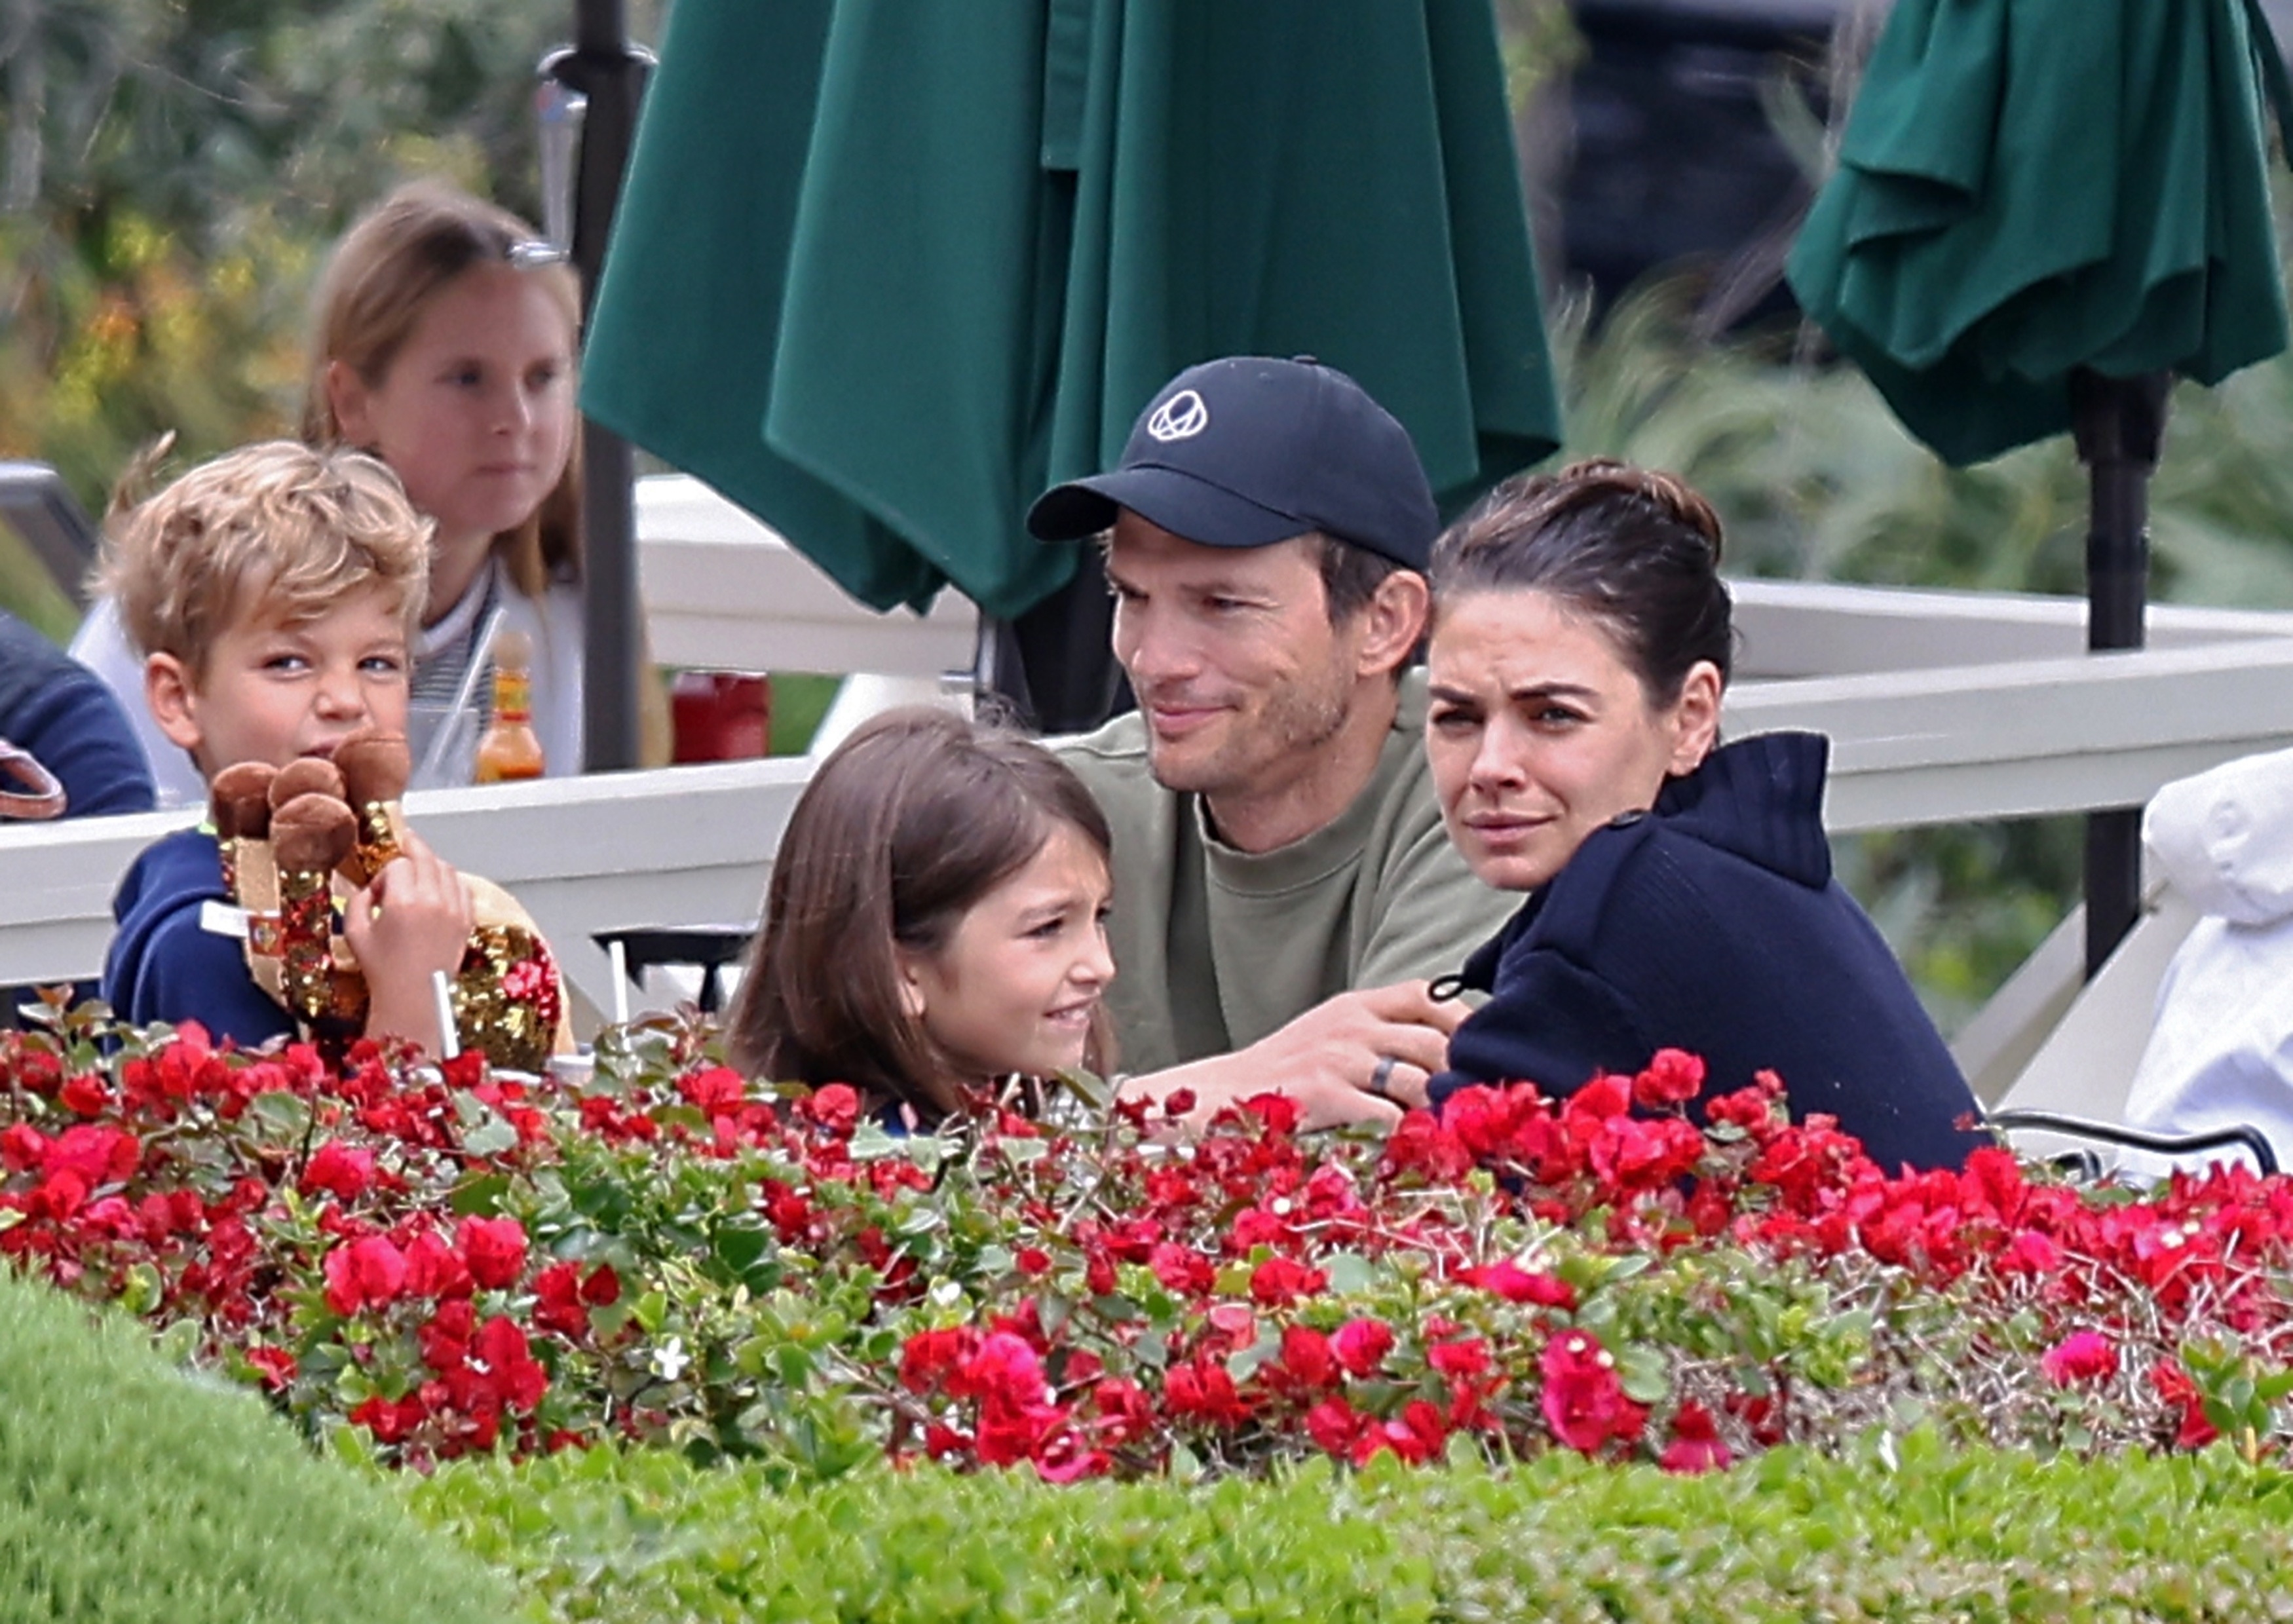 Family trip.  Ashton Kutcher and Mila Kunis went to lunch at an exclusive restaurant in Santa Monica with their children Wyatt and Dimitri